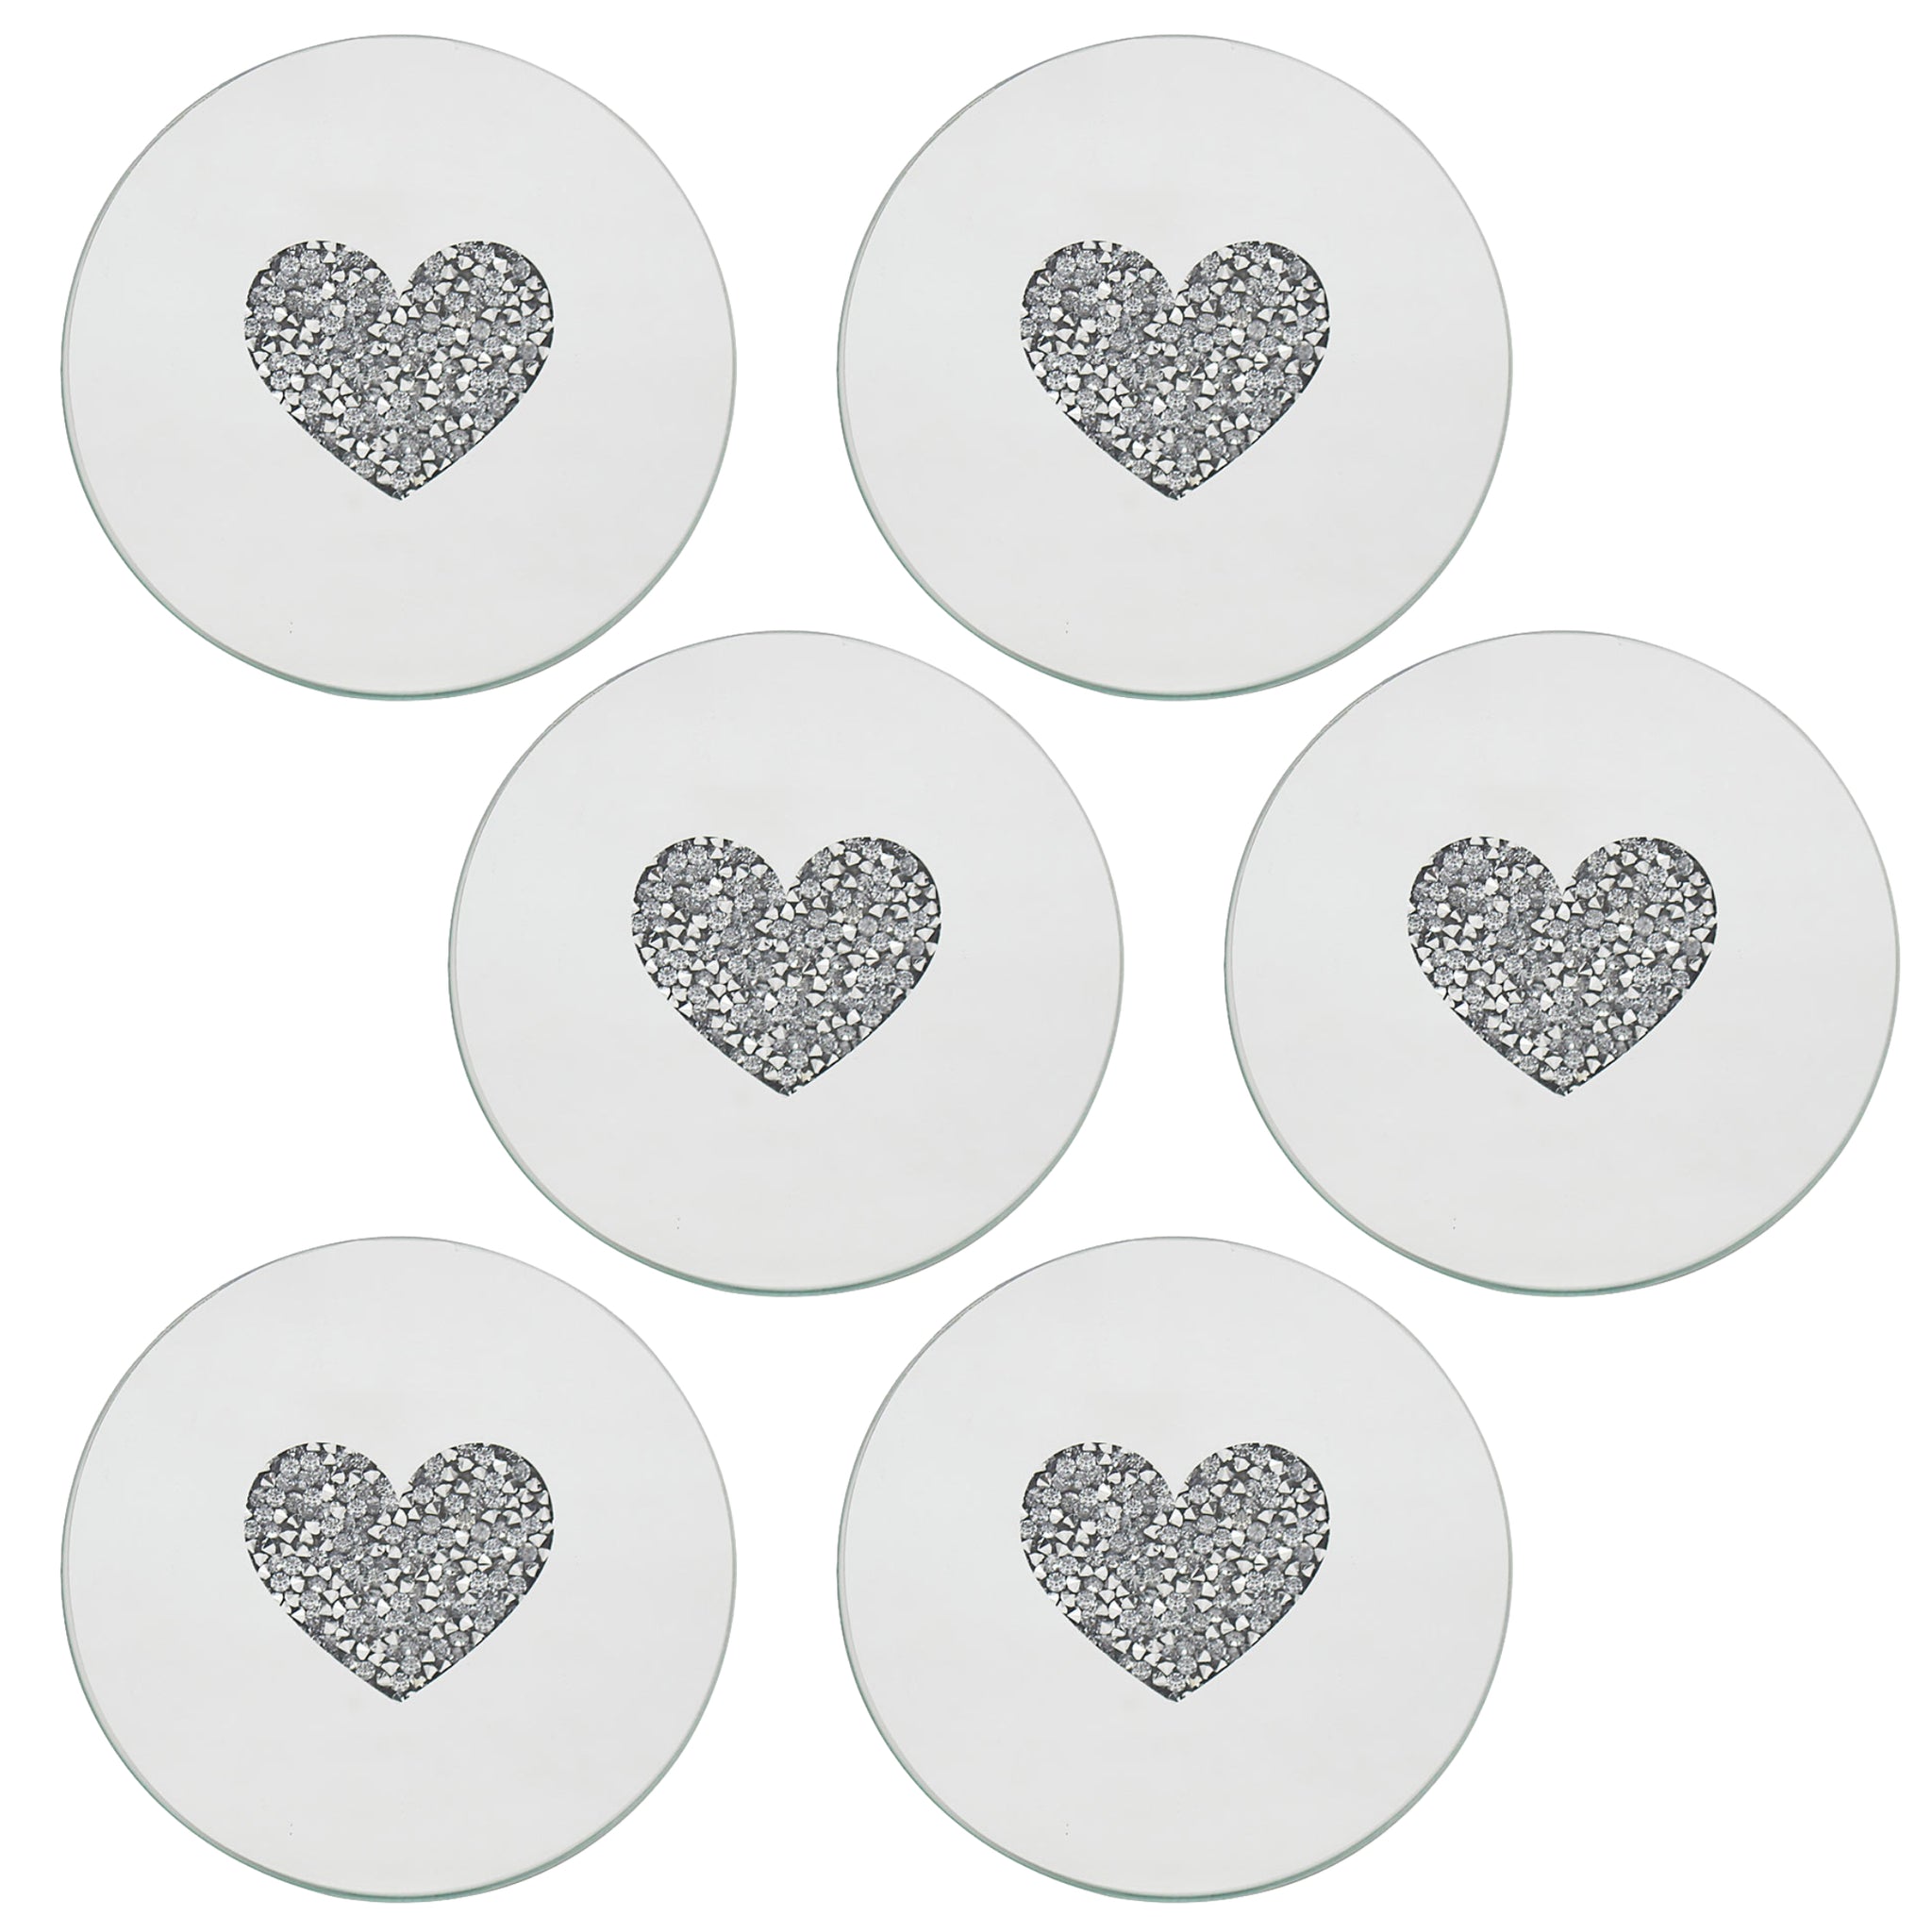 Set of 6 10cm Mirrored Round Candle Plate - Multi Crystal Heart Diamante